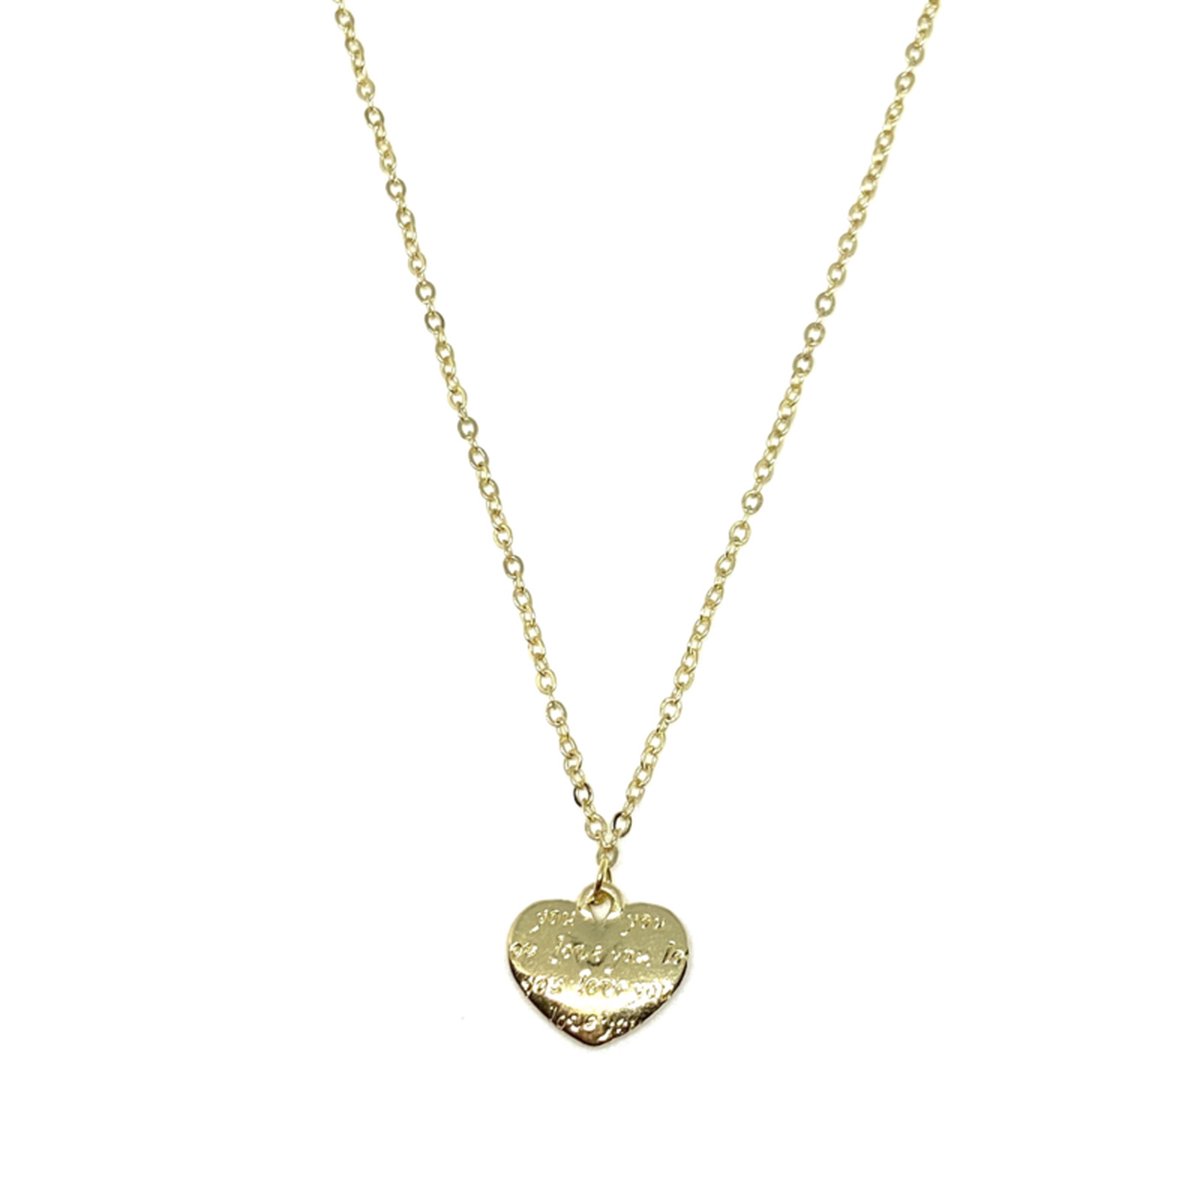 Love you necklace - gold